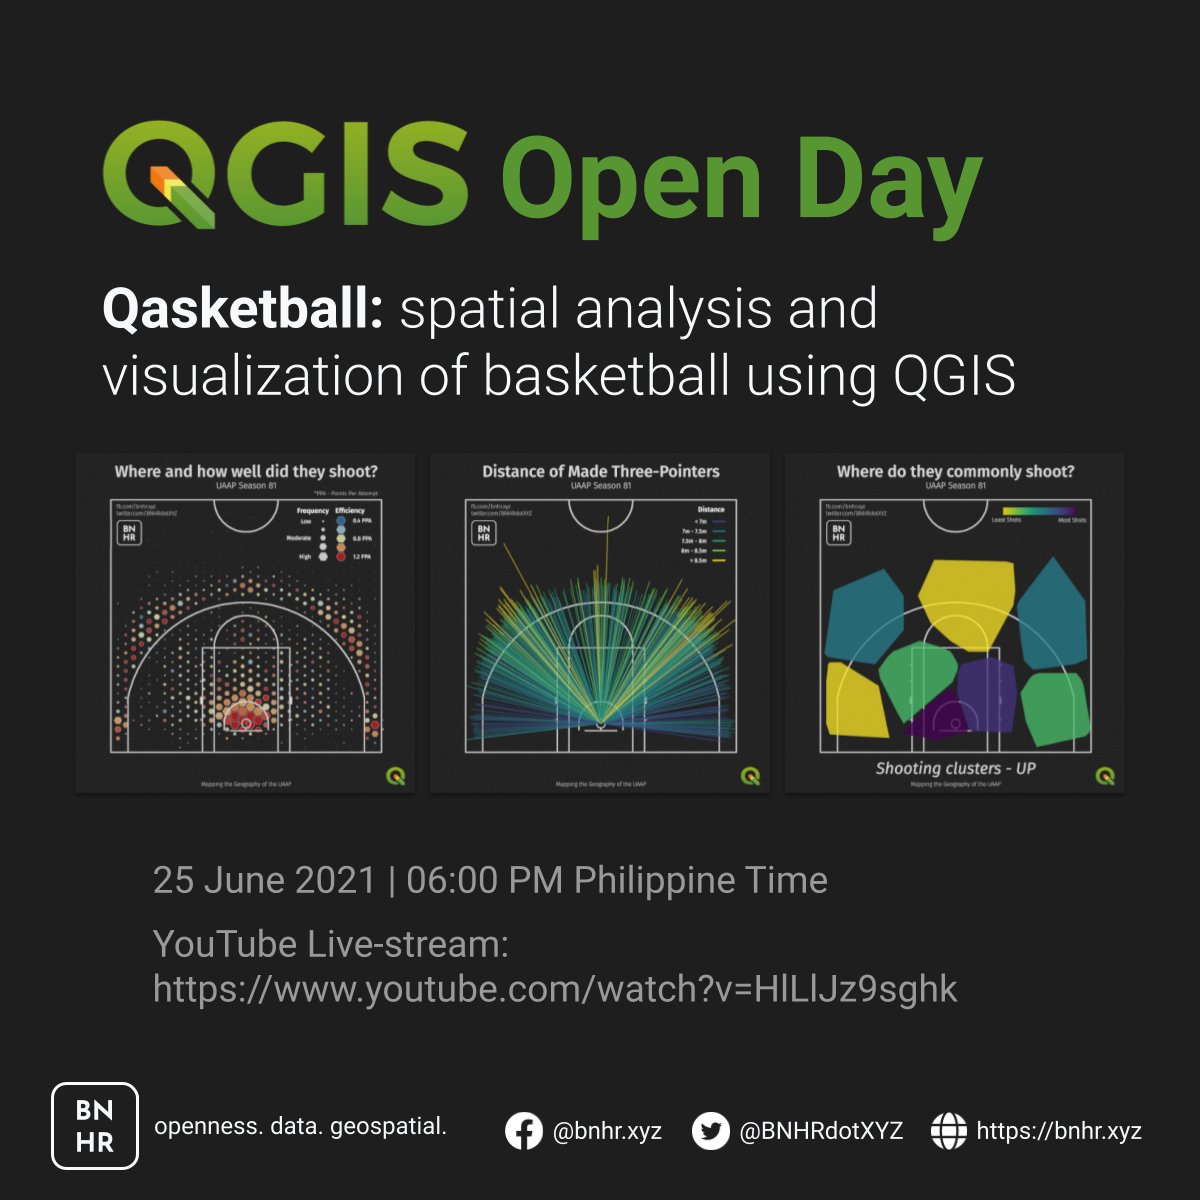 #QGISOpenDay today! Join me as I share about the inevitable fusion of QGIS and basketball: #Qasketball.

The event is free and open for everyone and will be live-streamed on YouTube at 06:00 PM Philippine Time at this link: youtu.be/HlLlJz9sghk

#qgis #foss4g #basketball